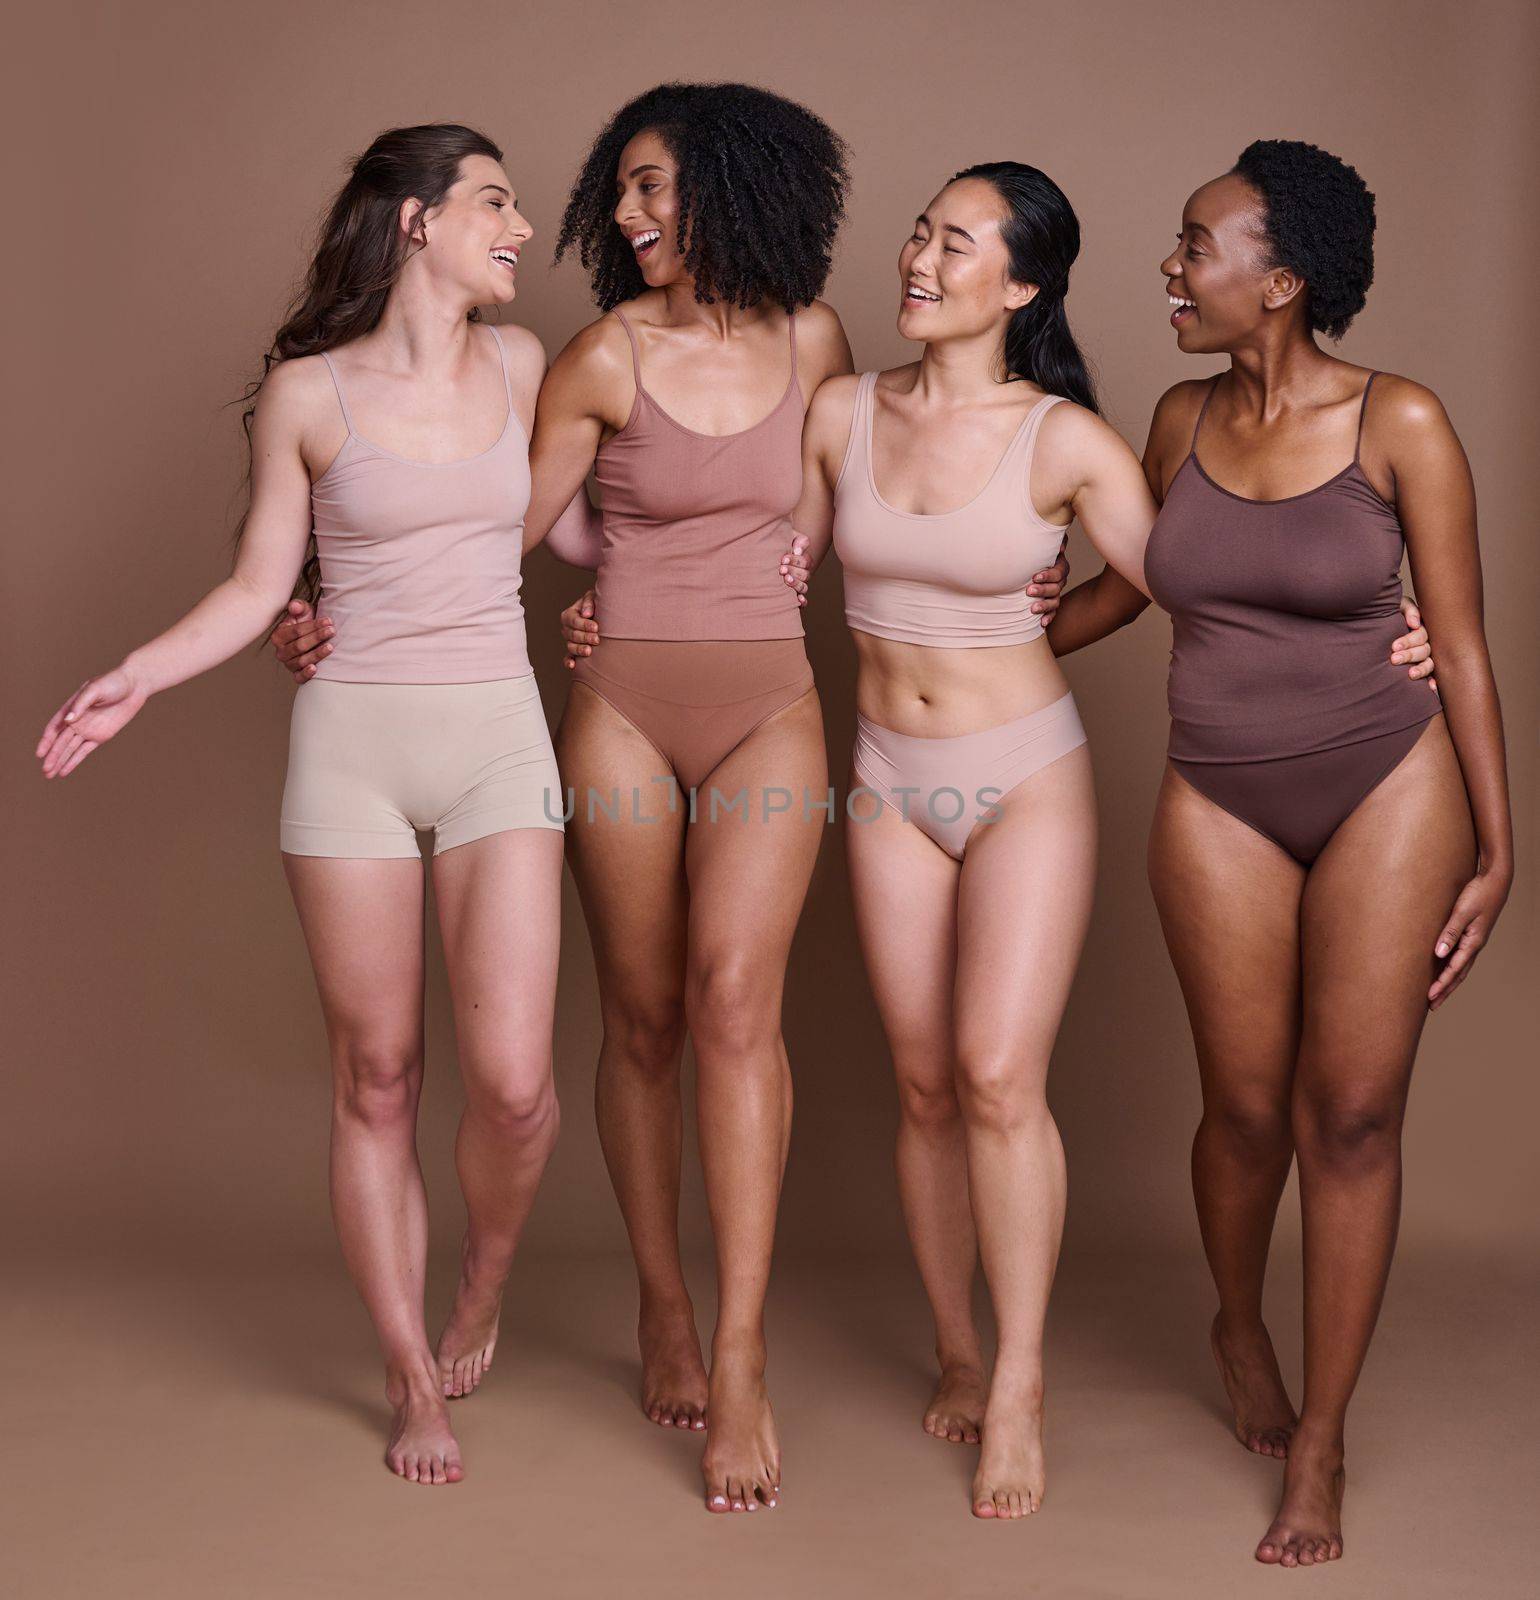 Women diversity, body positivity and happy hug of a group of model friends smile about skin beauty. Wellness, solidarity and proud woman community celebrate skincare, natural cosmetics and health by YuriArcurs